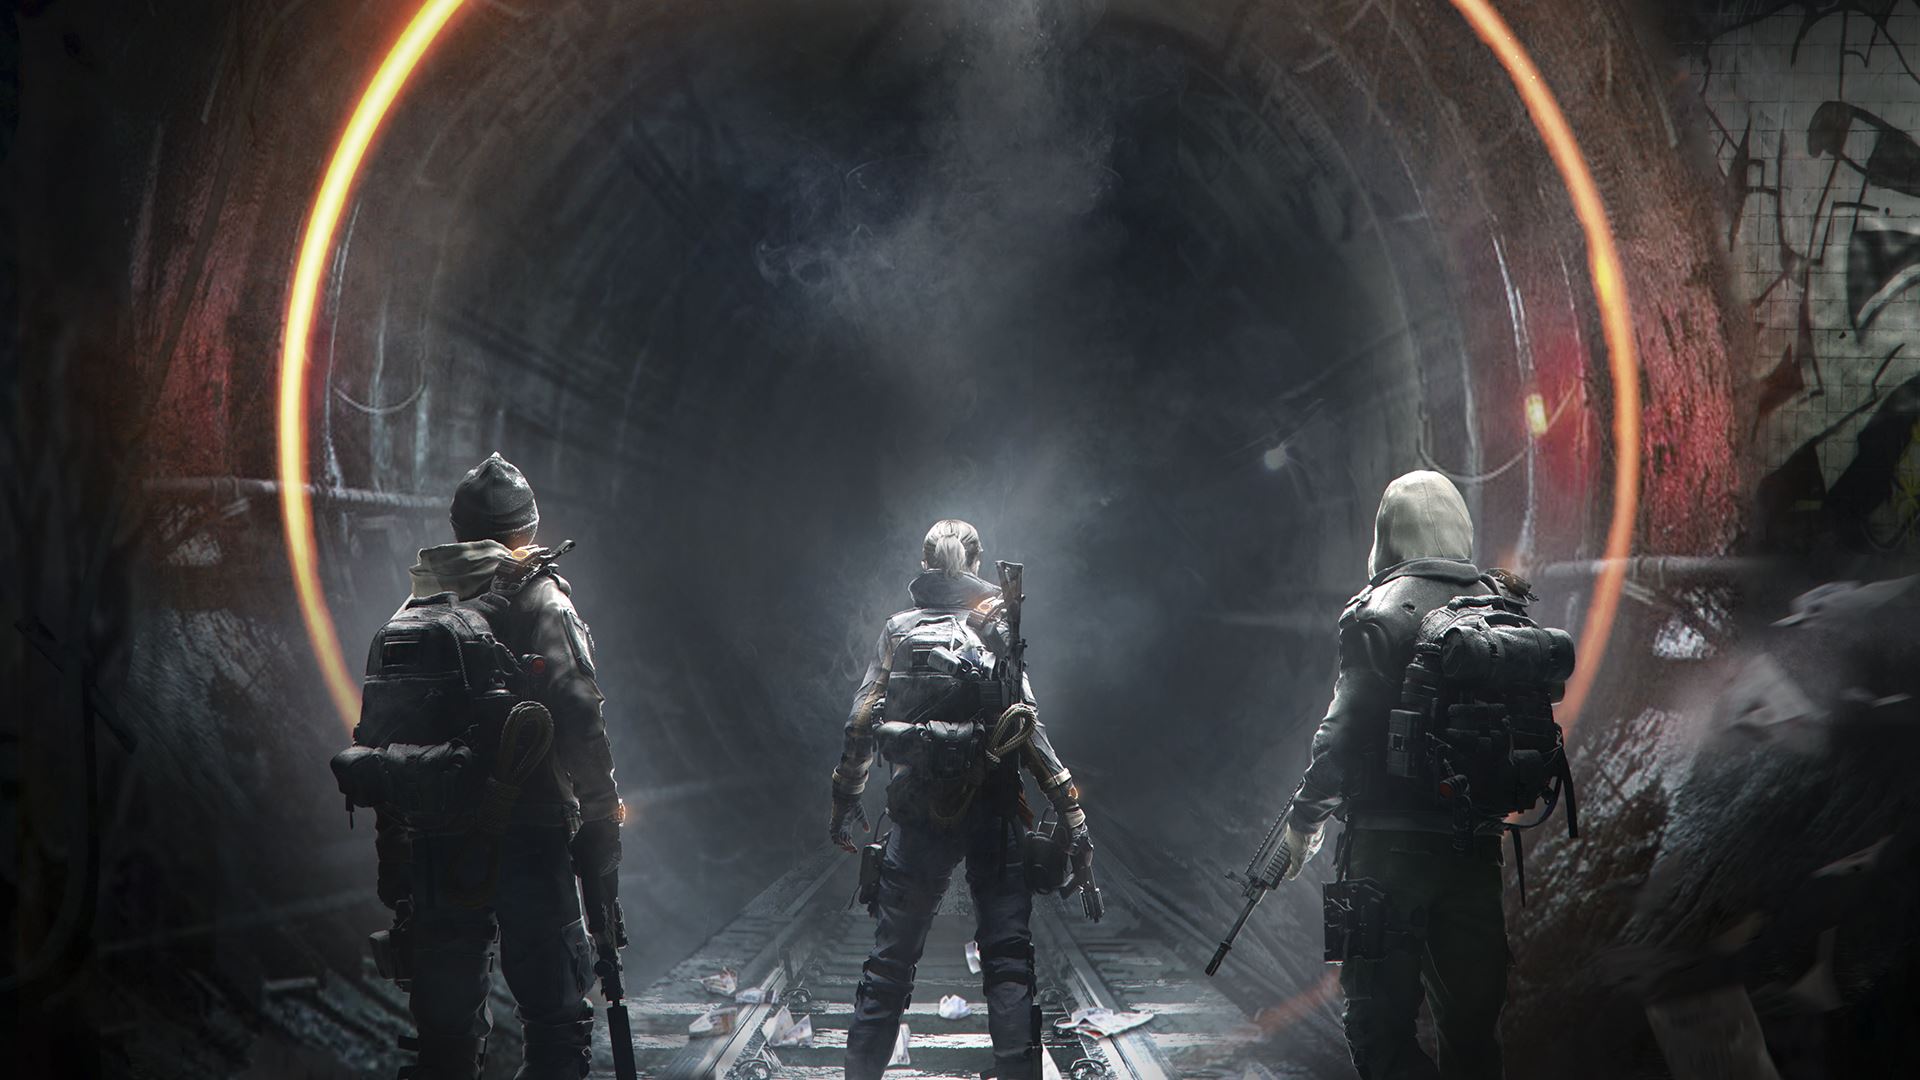 Tom Clancy’s The Division – Expansion 1 – Underground DLC